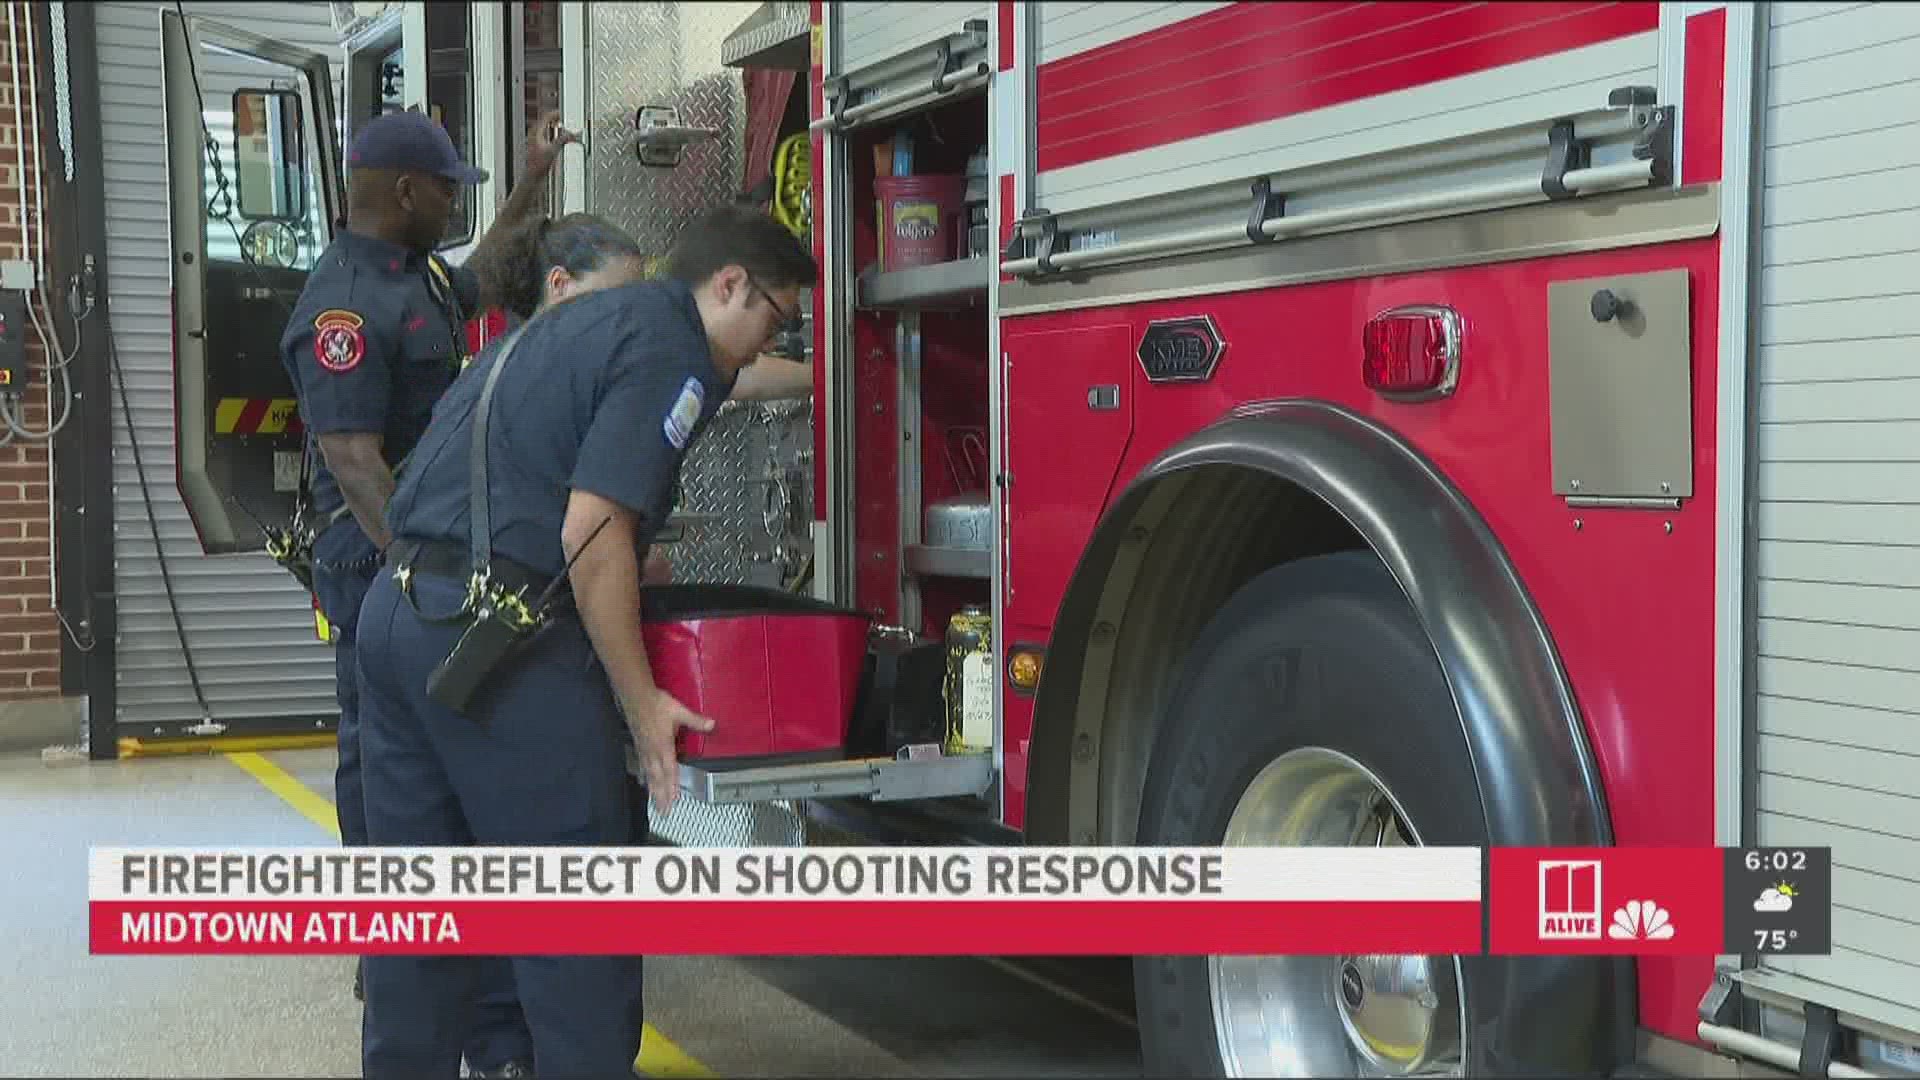 When the call first came into Fire Station 19, it was for one person shot. However, things quickly changed for first responders as more information came in.